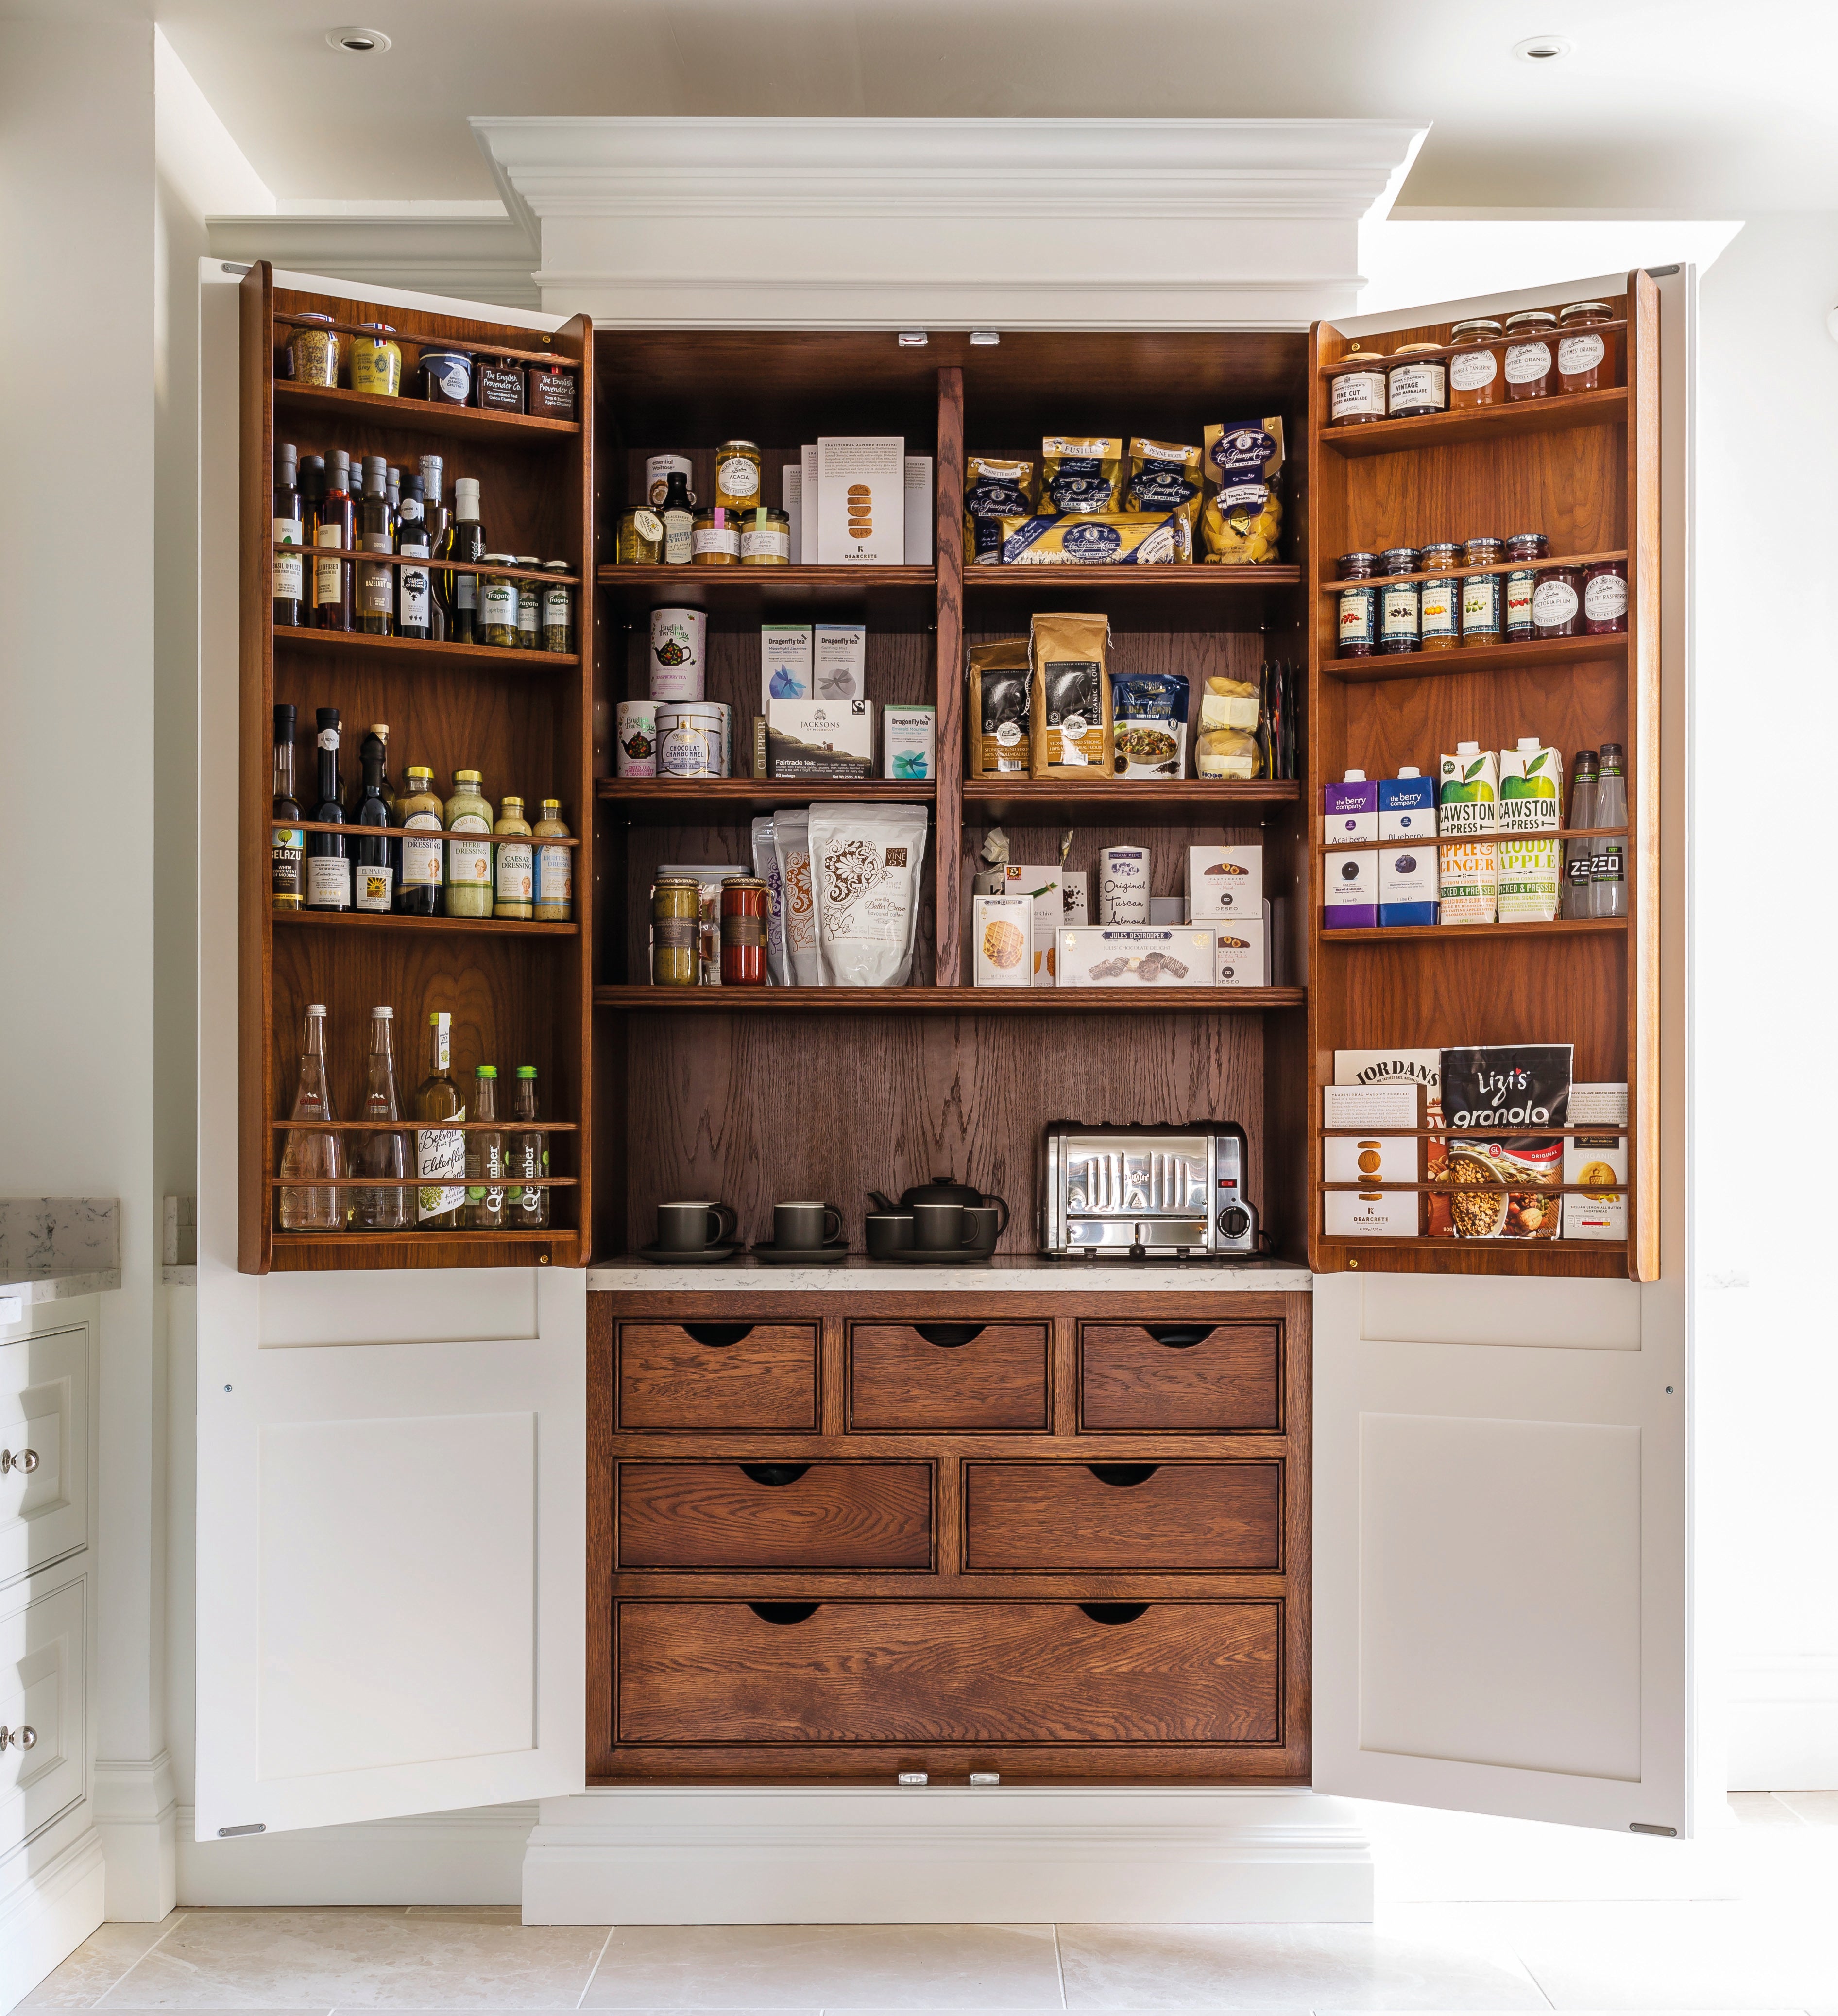 Opening a double pantry gives the process of cooking and entertaining a real sense of occasion